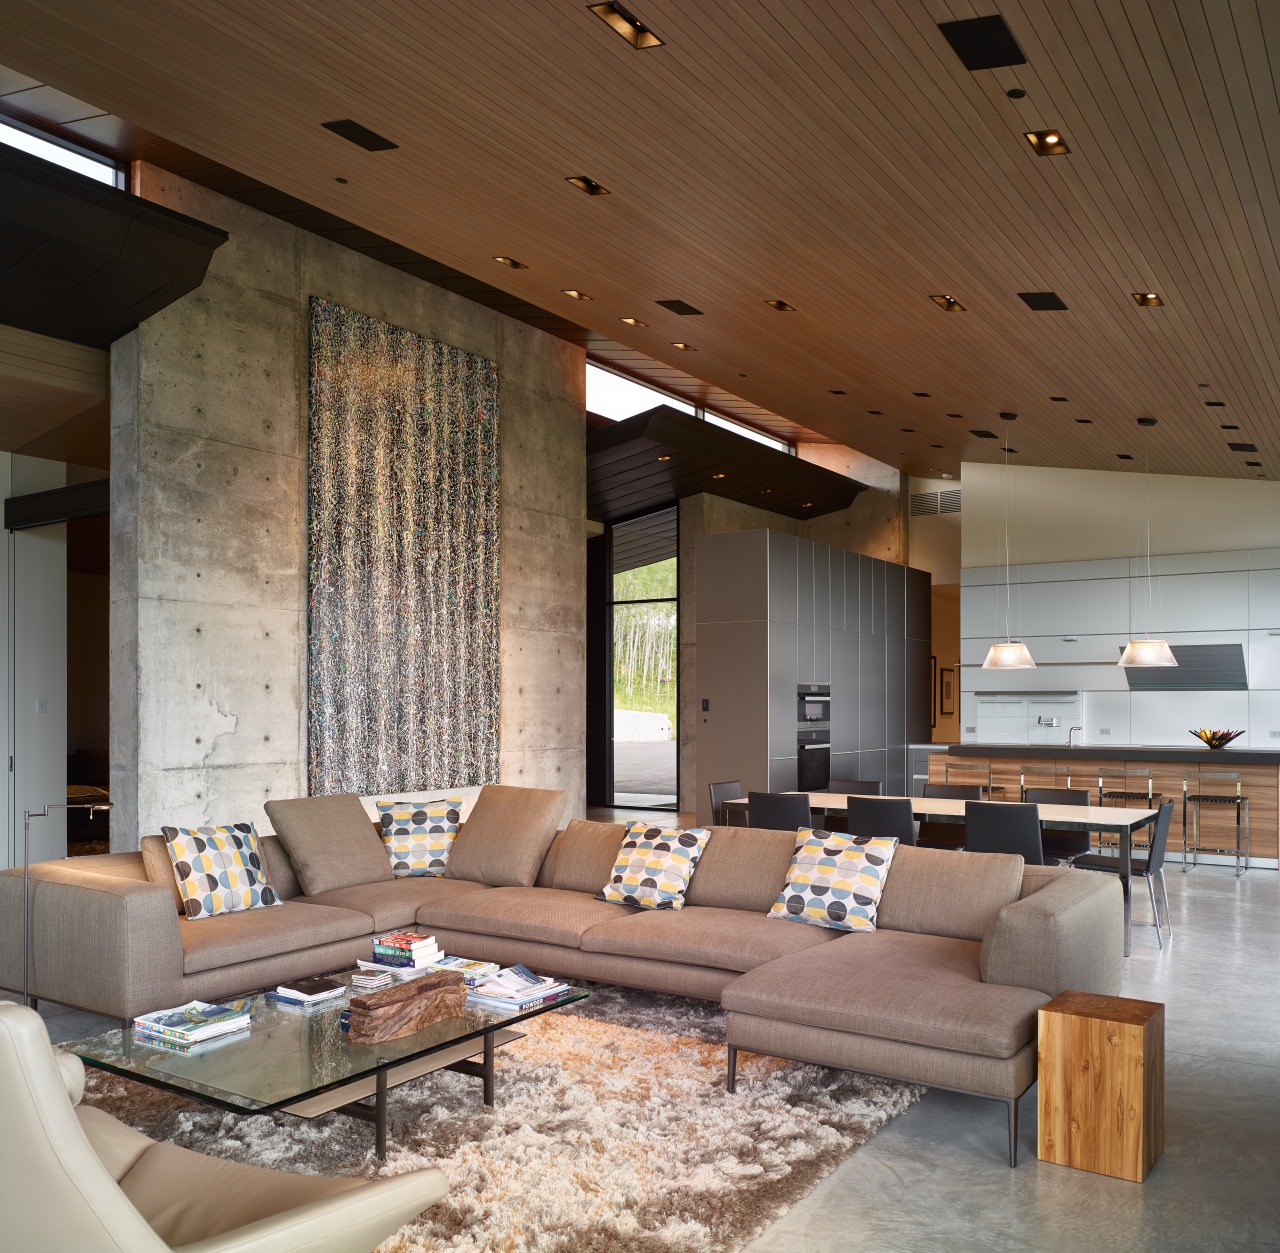 The main entrance to this home can be architecture, ceiling, interior design, living room, lobby, table, wall, brown, gray